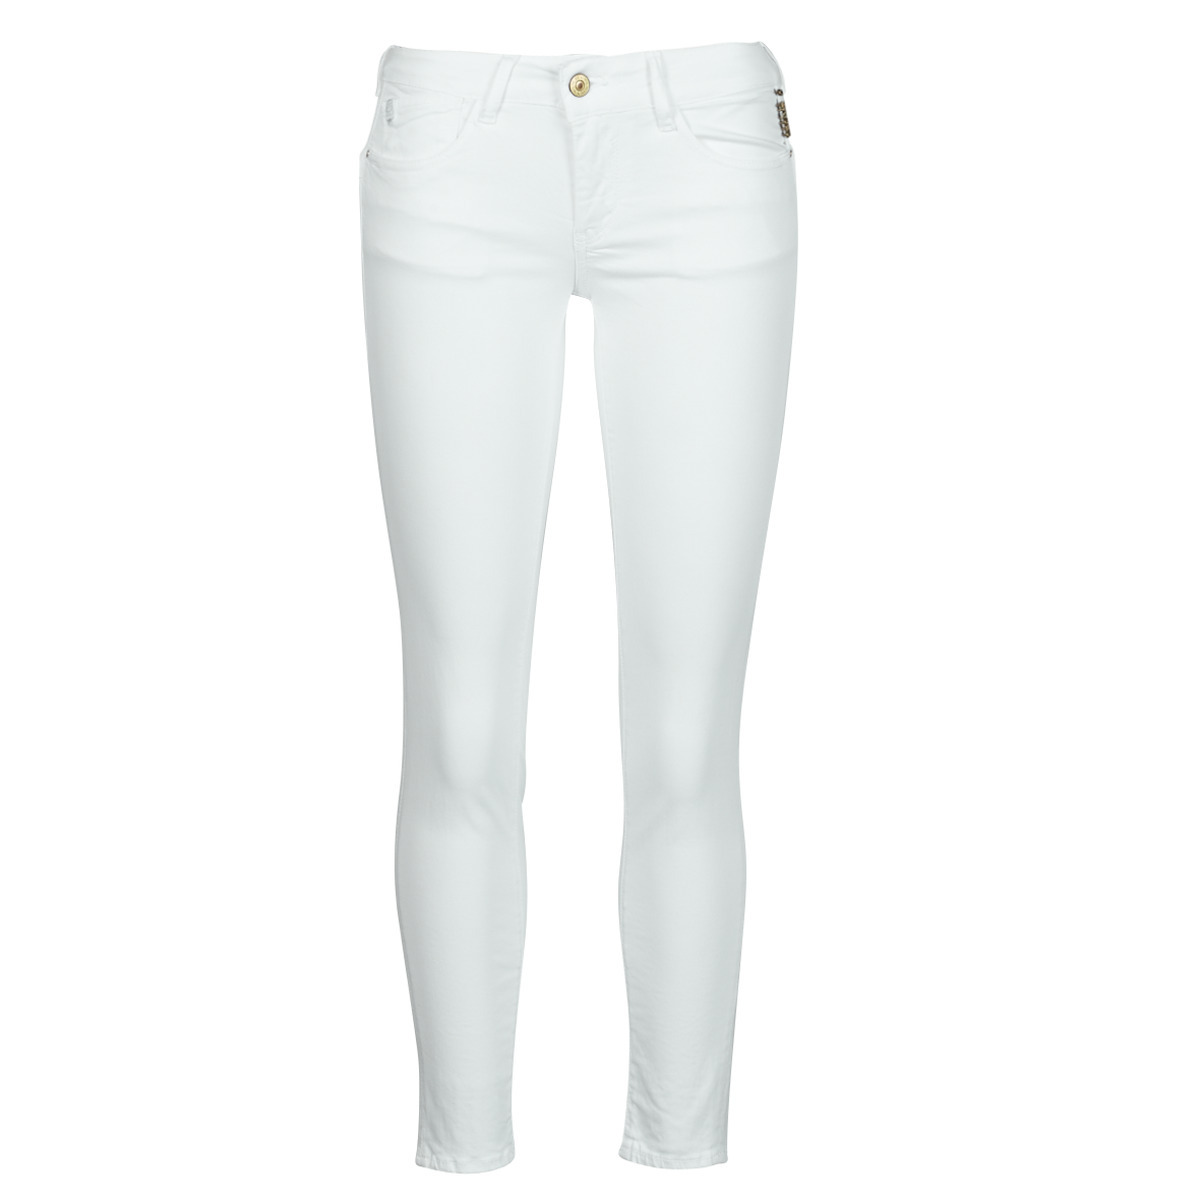 Spartoo Woman Chino Pants in White from Le Temps des Cerises GOOFASH